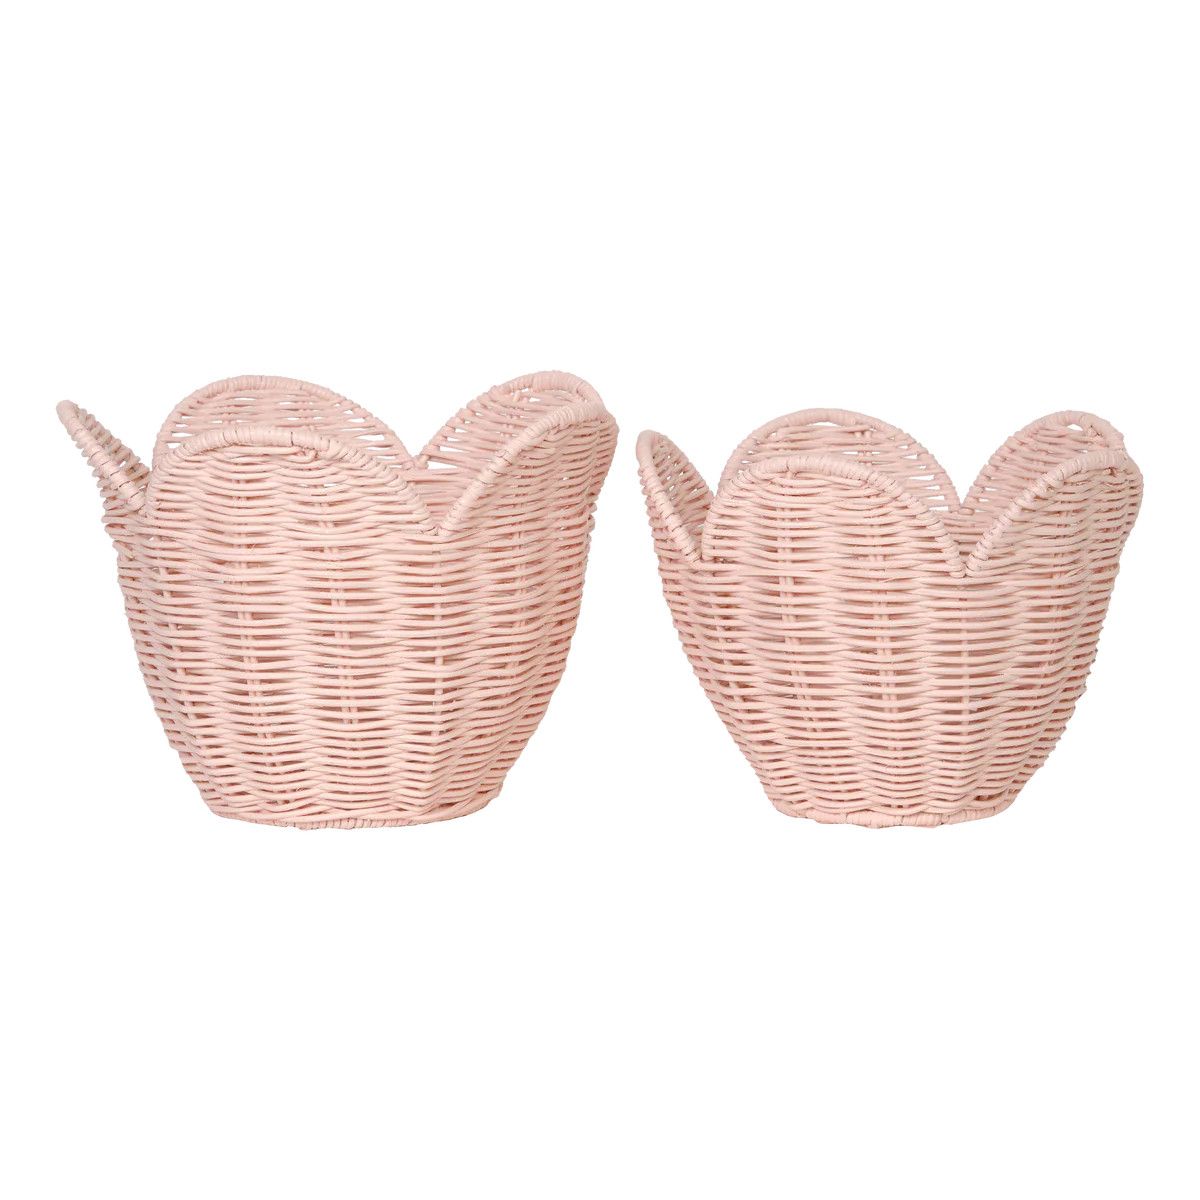 Rattan Lily Basket Set in Blush | Over The Moon